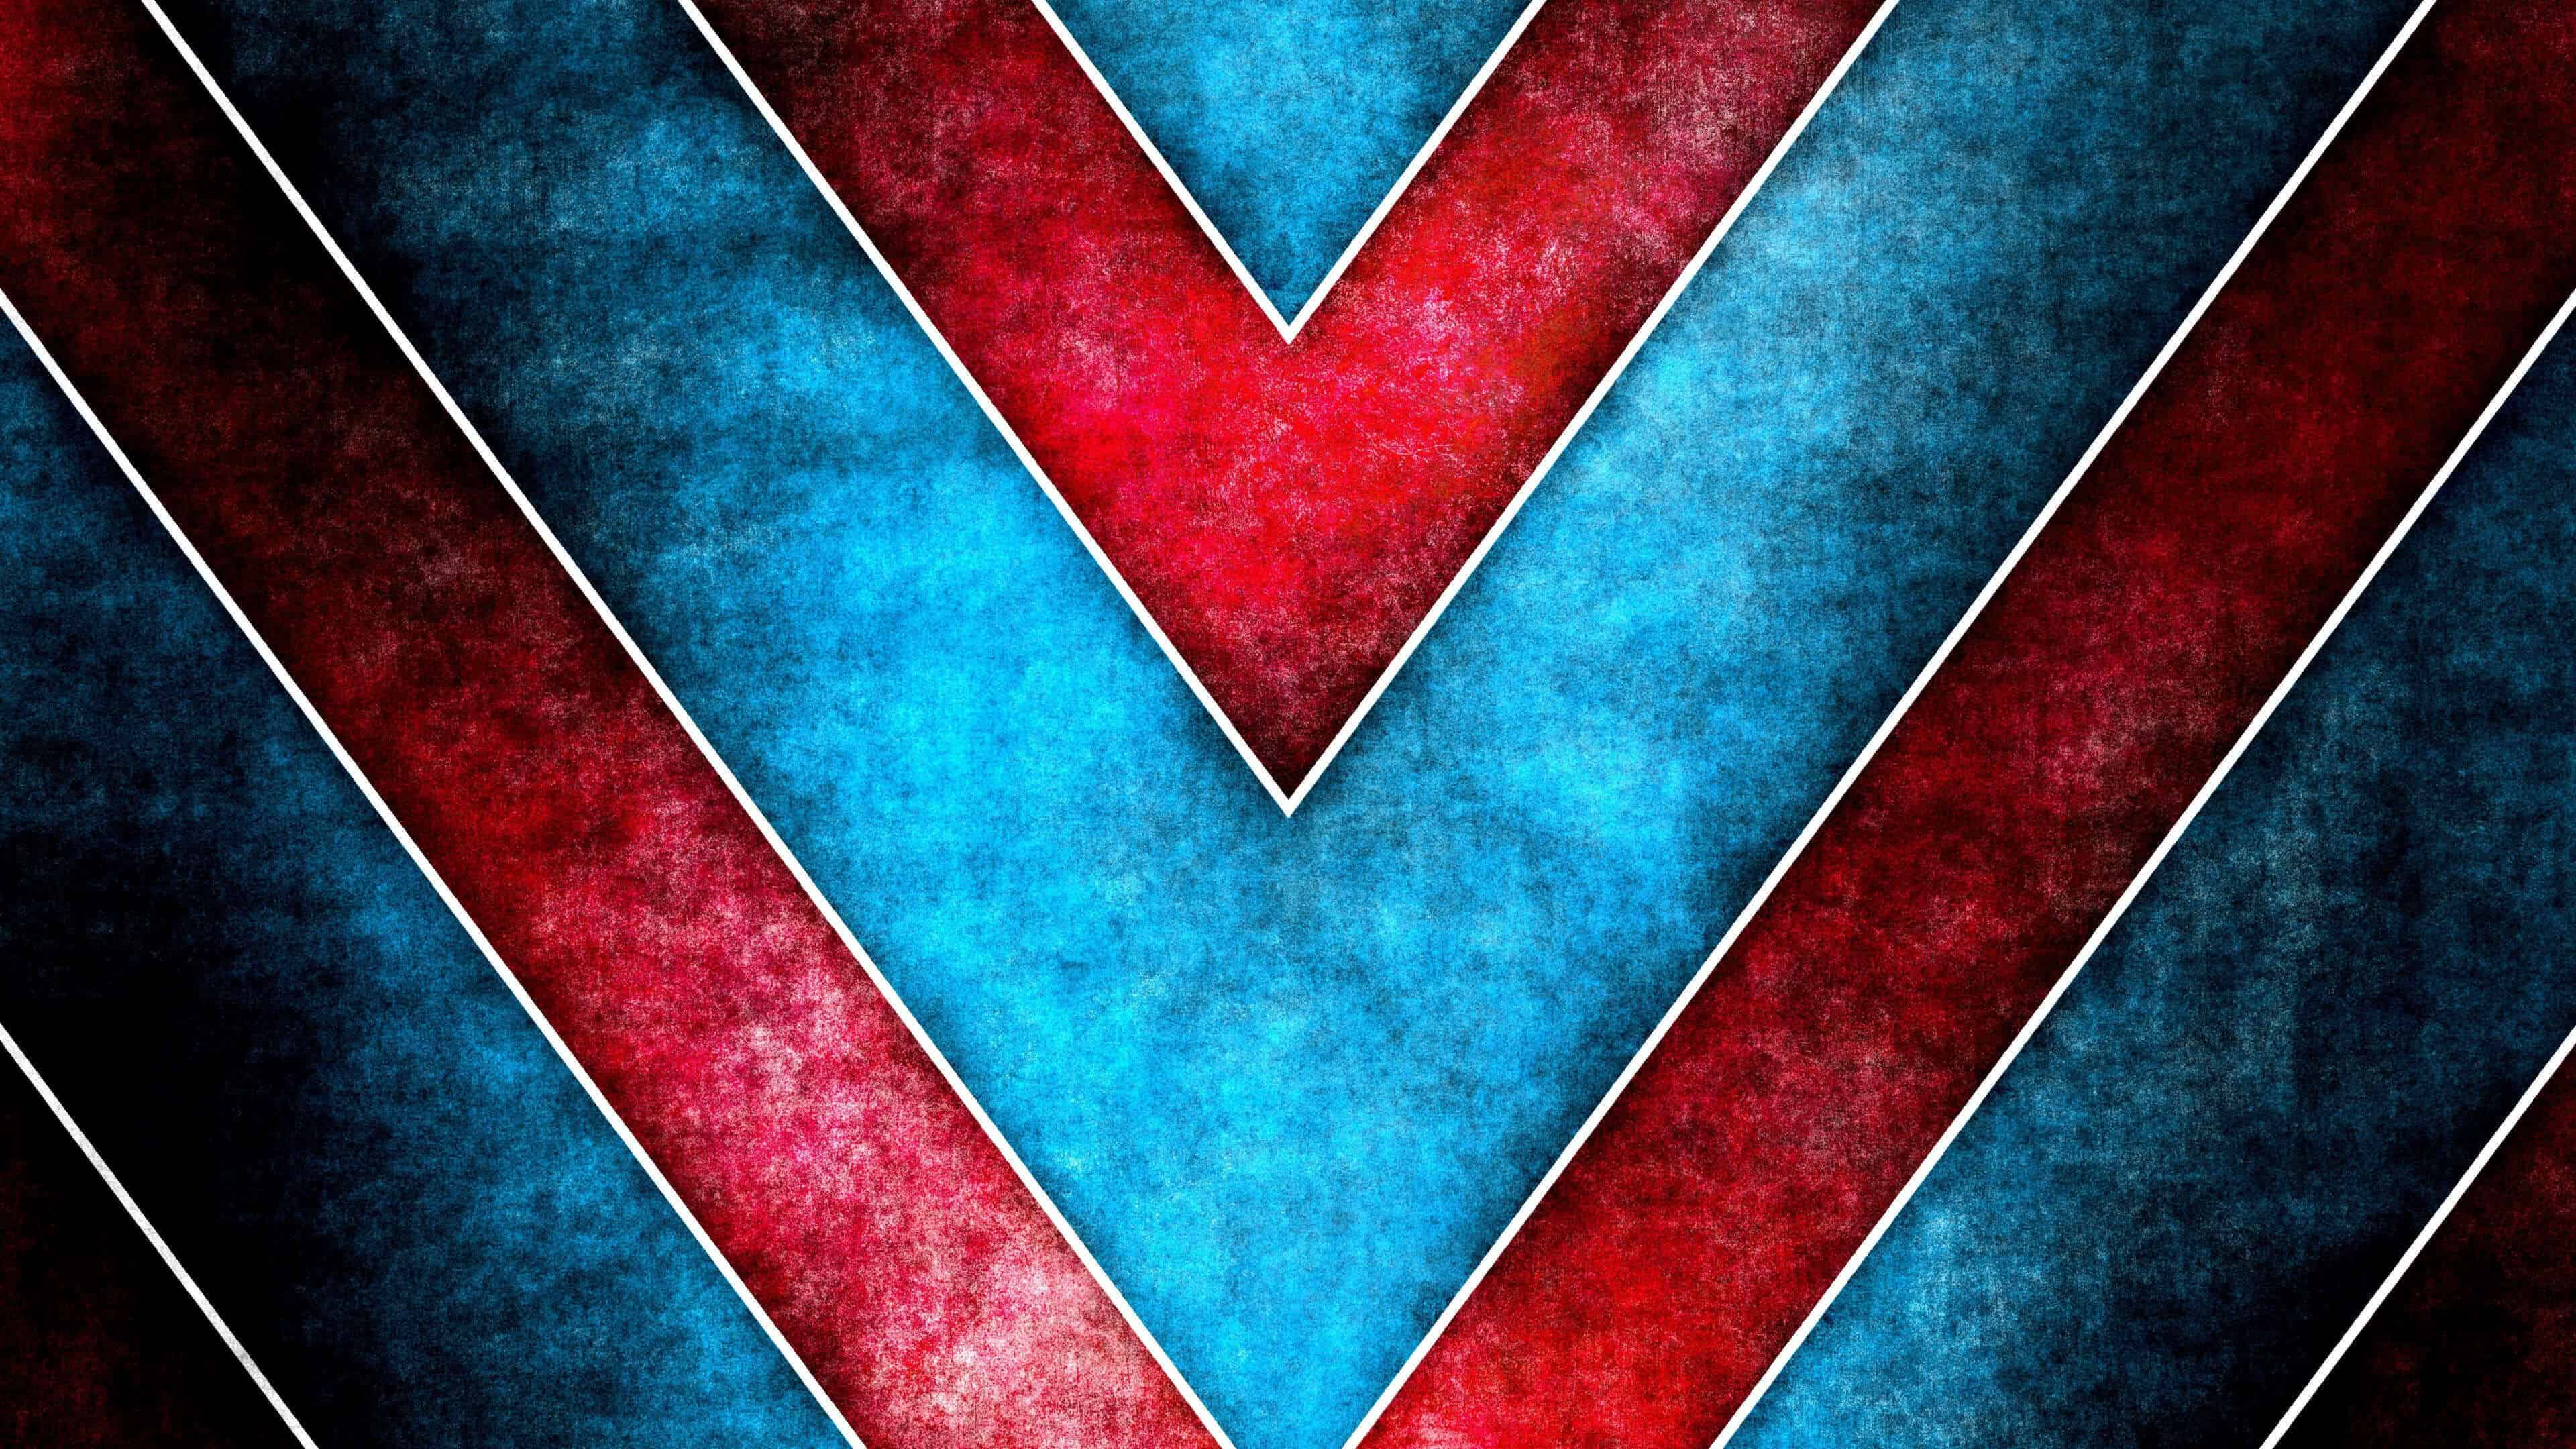 4k Wallpaper Red And Blue